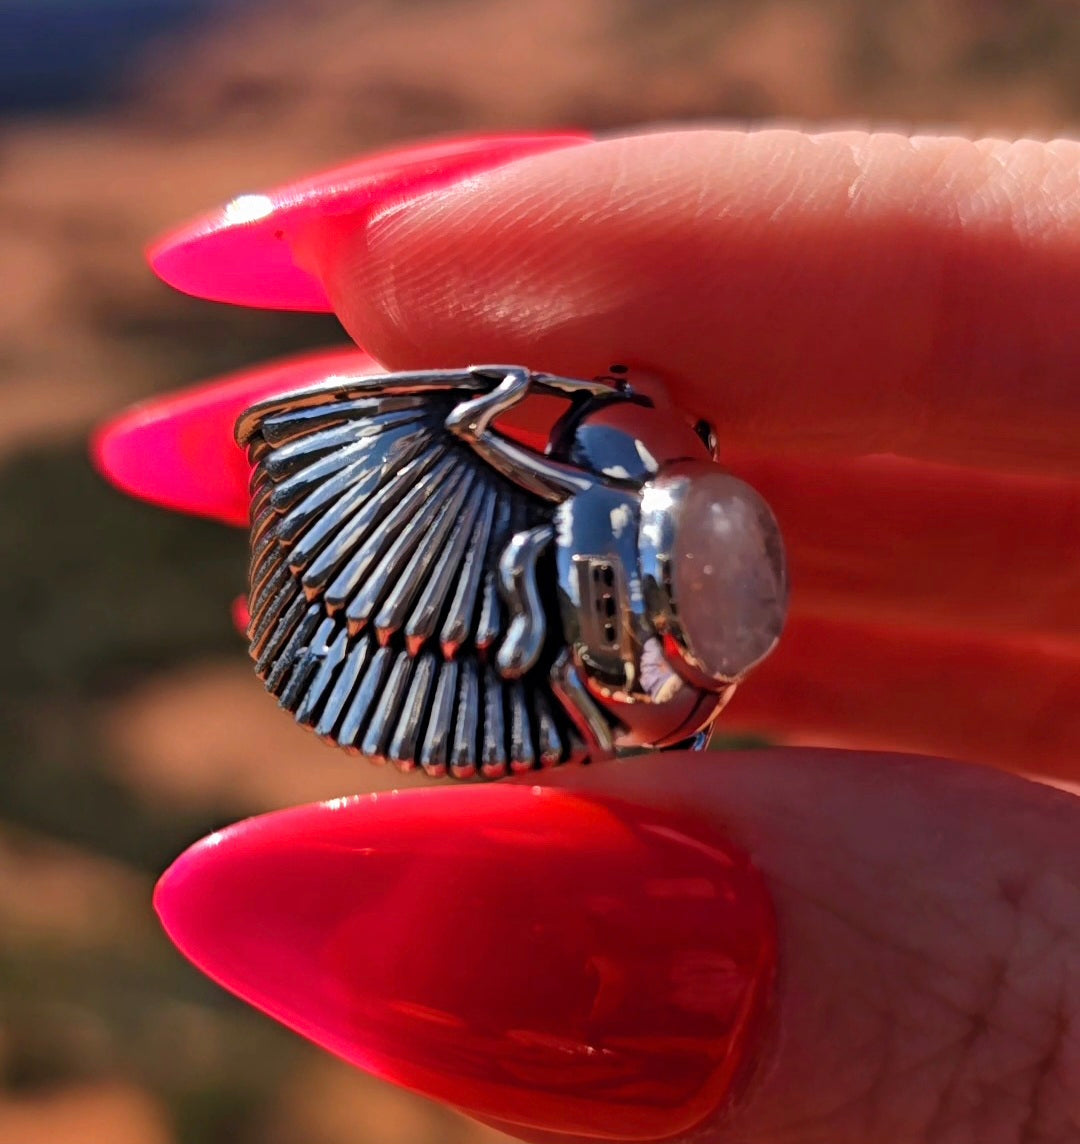 Rainbow Moonstone Scarab Finger Cuff Adjustable Ring .925 Silver for Intuition, Luck, Protection and Purification